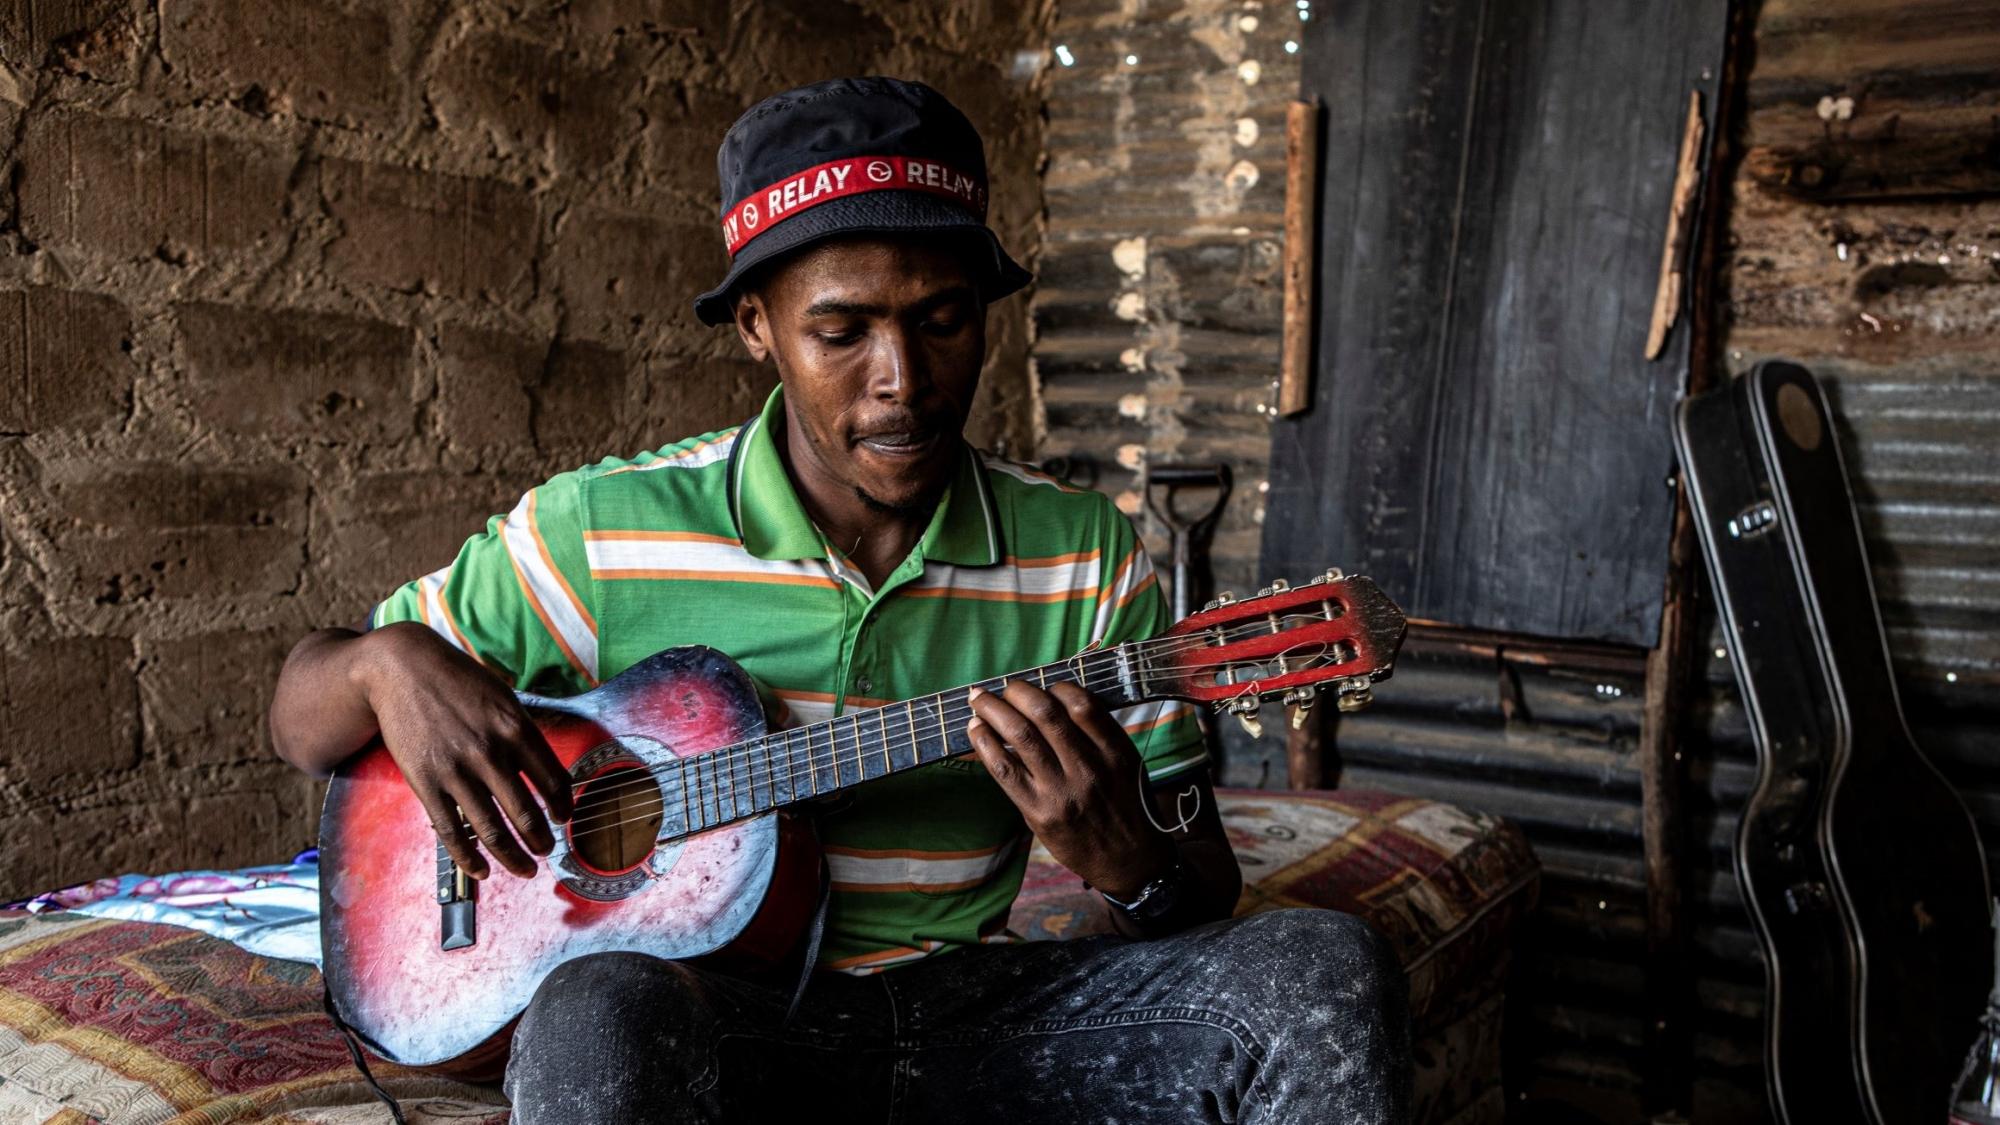 A young man sits on a mattress in a small shack, playing the guitar